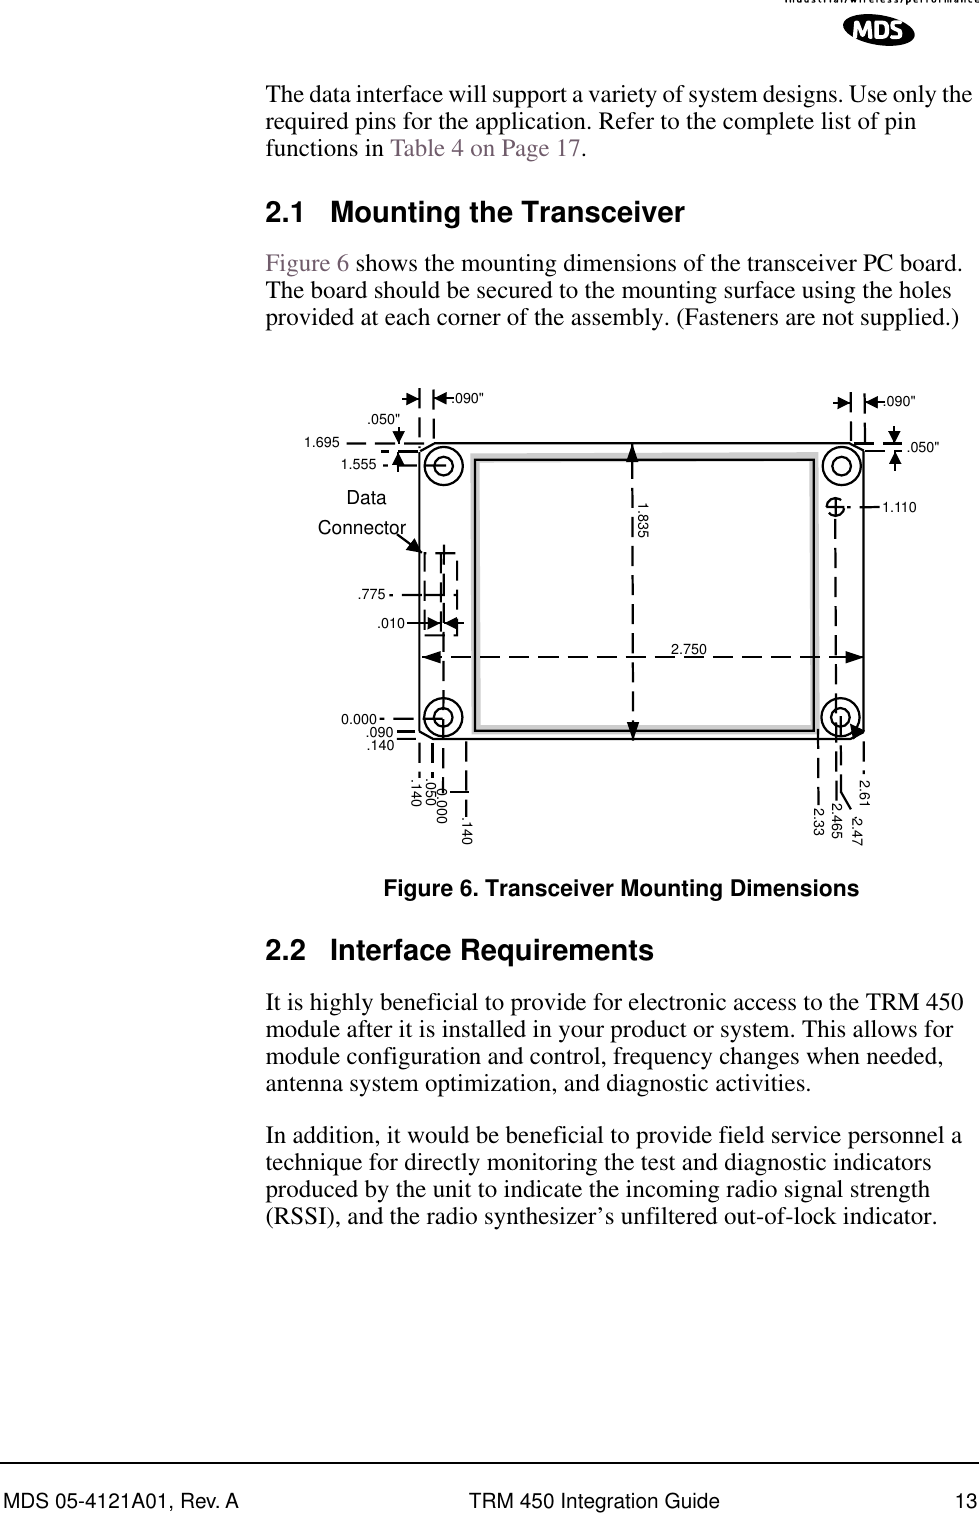  MDS 05-4121A01, Rev. A TRM 450 Integration Guide 13 The data interface will support a variety of system designs. Use only the required pins for the application.   Refer to the complete list of pin functions in Table 4 on Page 17. 2.1 Mounting the Transceiver Figure 6 shows the mounting dimensions of the transceiver PC board. The board should be secured to the mounting surface using the holes provided at each corner of the assembly. (Fasteners are not supplied.)  Invisible place holder Figure 6. Transceiver Mounting Dimensions  2.2 Interface Requirements It is highly beneficial to provide for electronic access to the TRM 450 module after it is installed in your product or system. This allows for module configuration and control, frequency changes when needed, antenna system optimization, and diagnostic activities.In addition, it would be beneficial to provide field service personnel a technique for directly monitoring the test and diagnostic indicators produced by the unit to indicate the incoming radio signal strength (RSSI), and the radio synthesizer’s unfiltered out-of-lock indicator. .1400.0000.0002.472.61.1401.5551.6952.7501.8352.33.140DataConnector.090&quot; .090&quot;.050&quot;.050&quot;.010.7752.4651.110.090.050